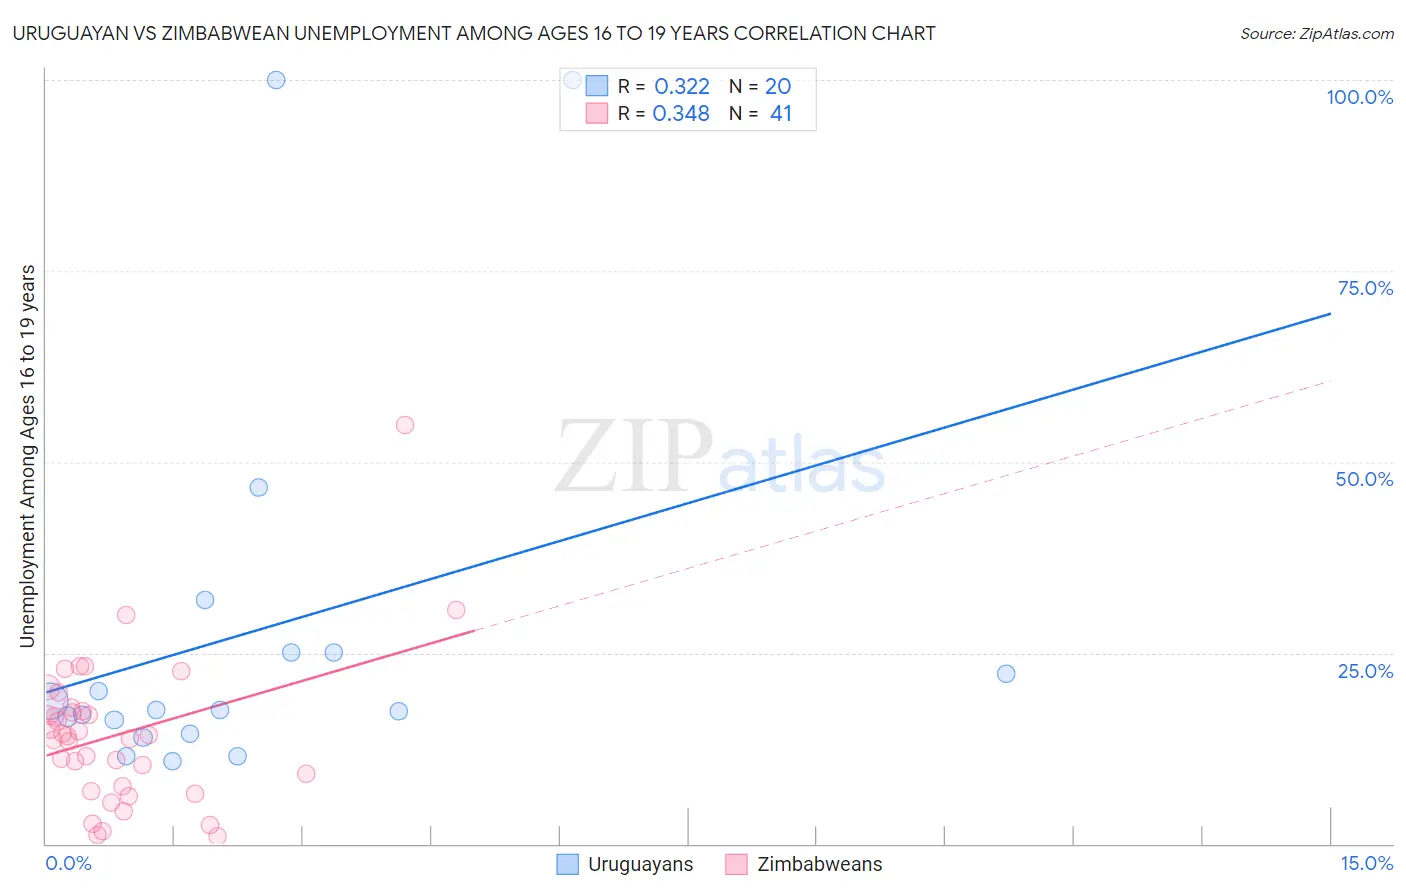 Uruguayan vs Zimbabwean Unemployment Among Ages 16 to 19 years